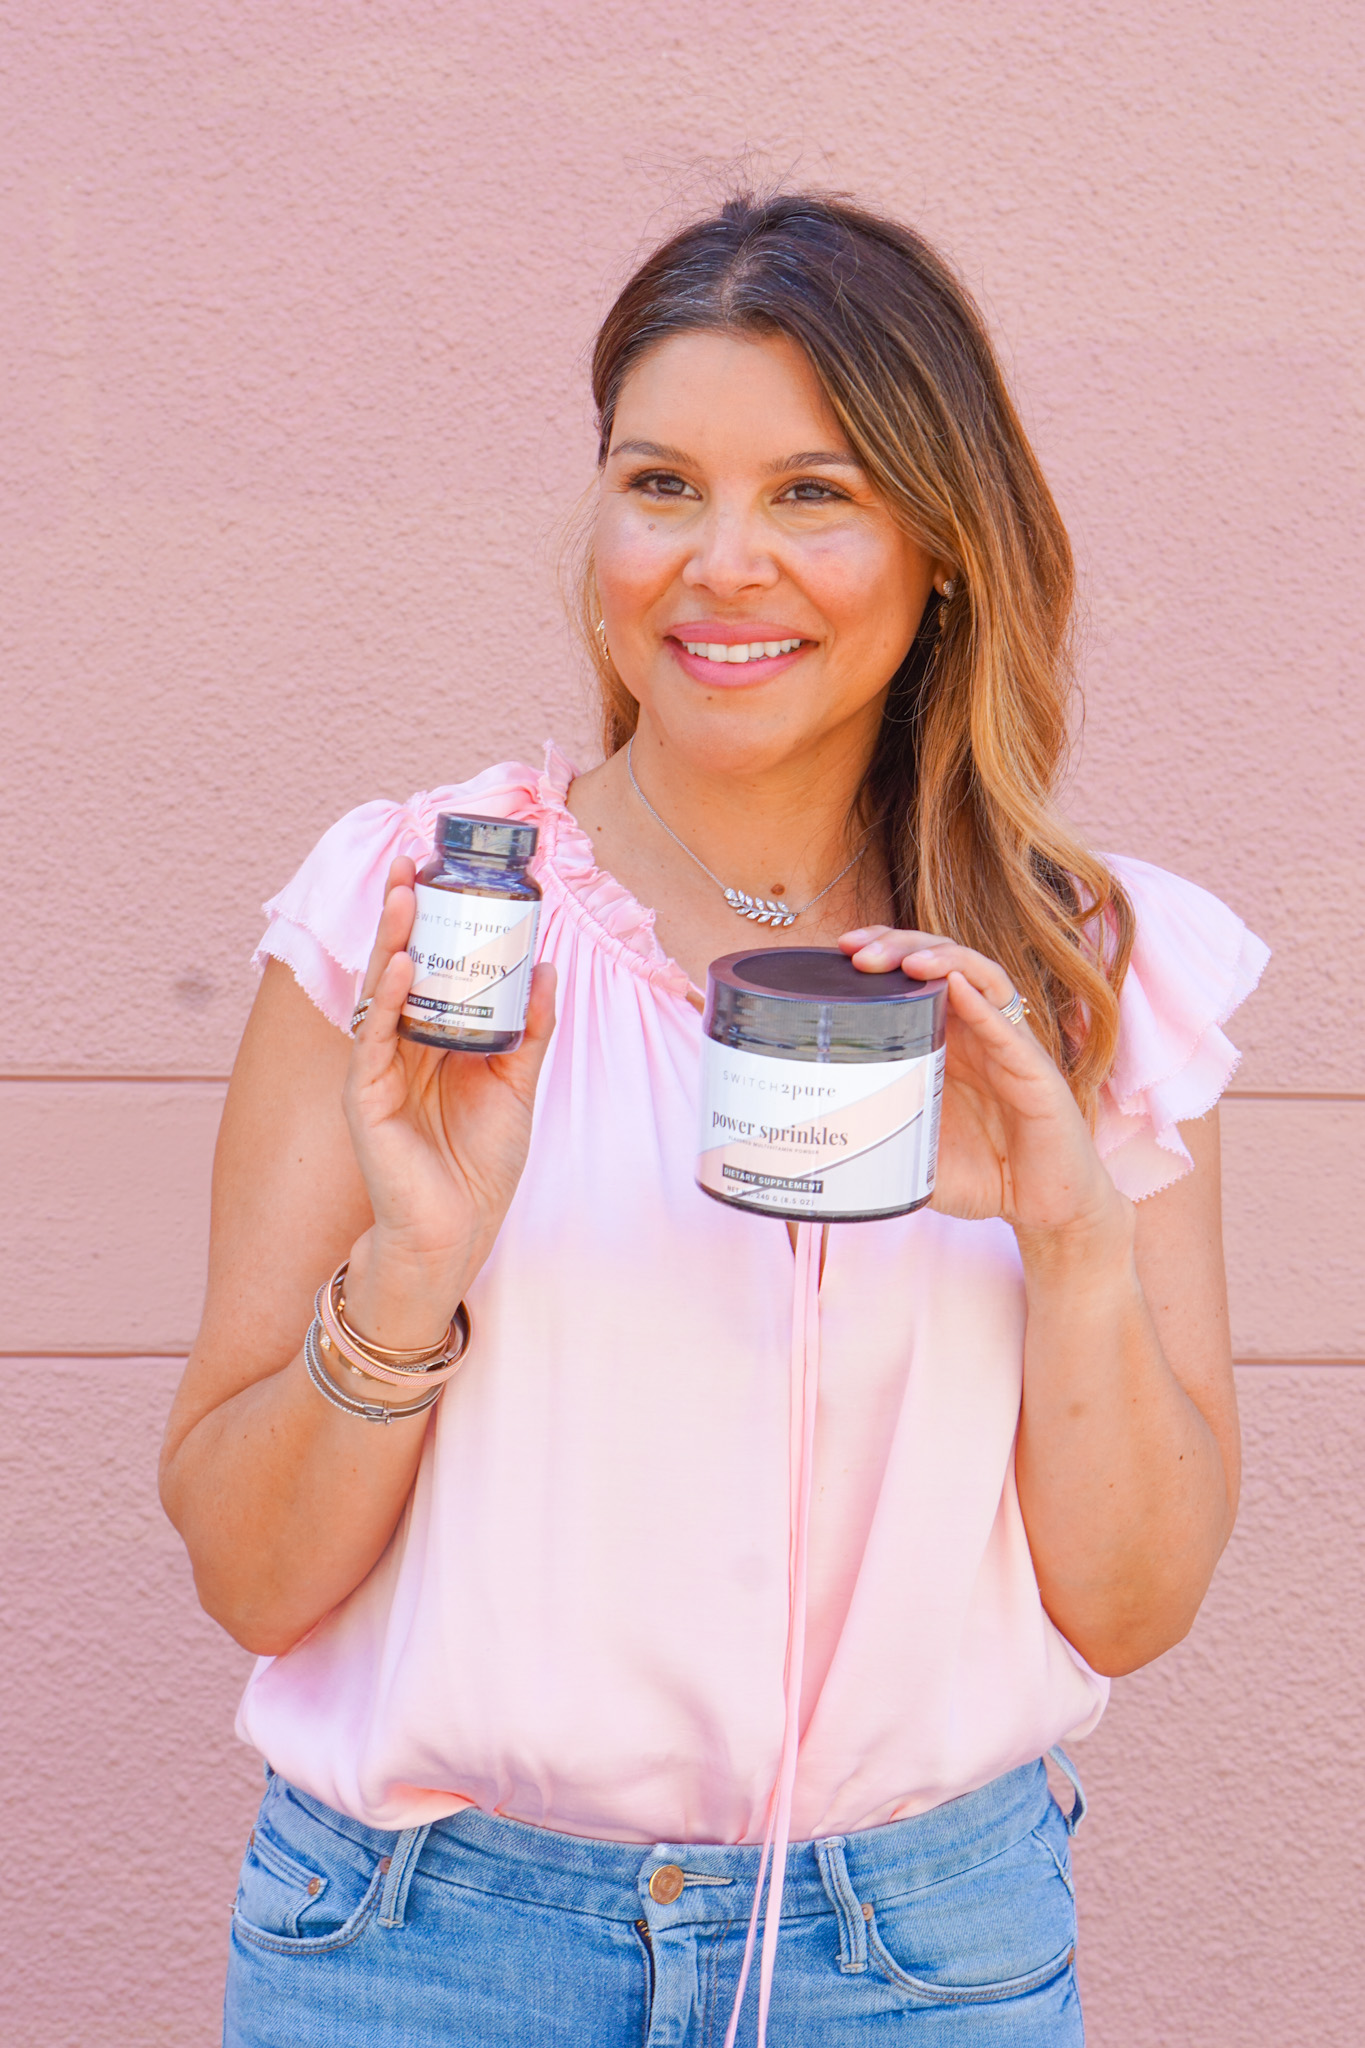 Switch2pure founder Estela Cockrell with multivitamin power sprinkles and probiotics